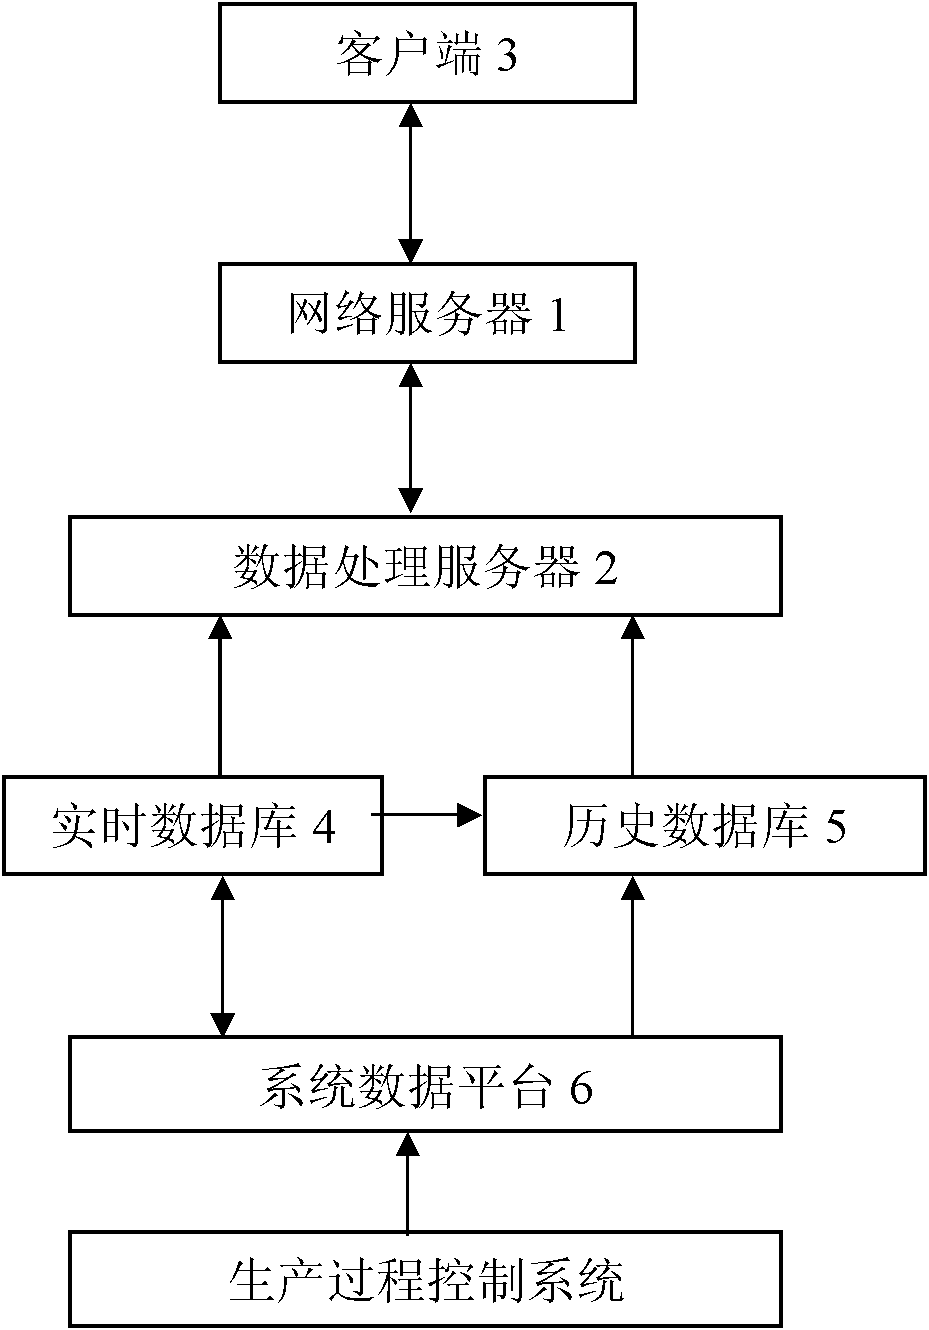 Method and system for tracking quality of products in flow industry